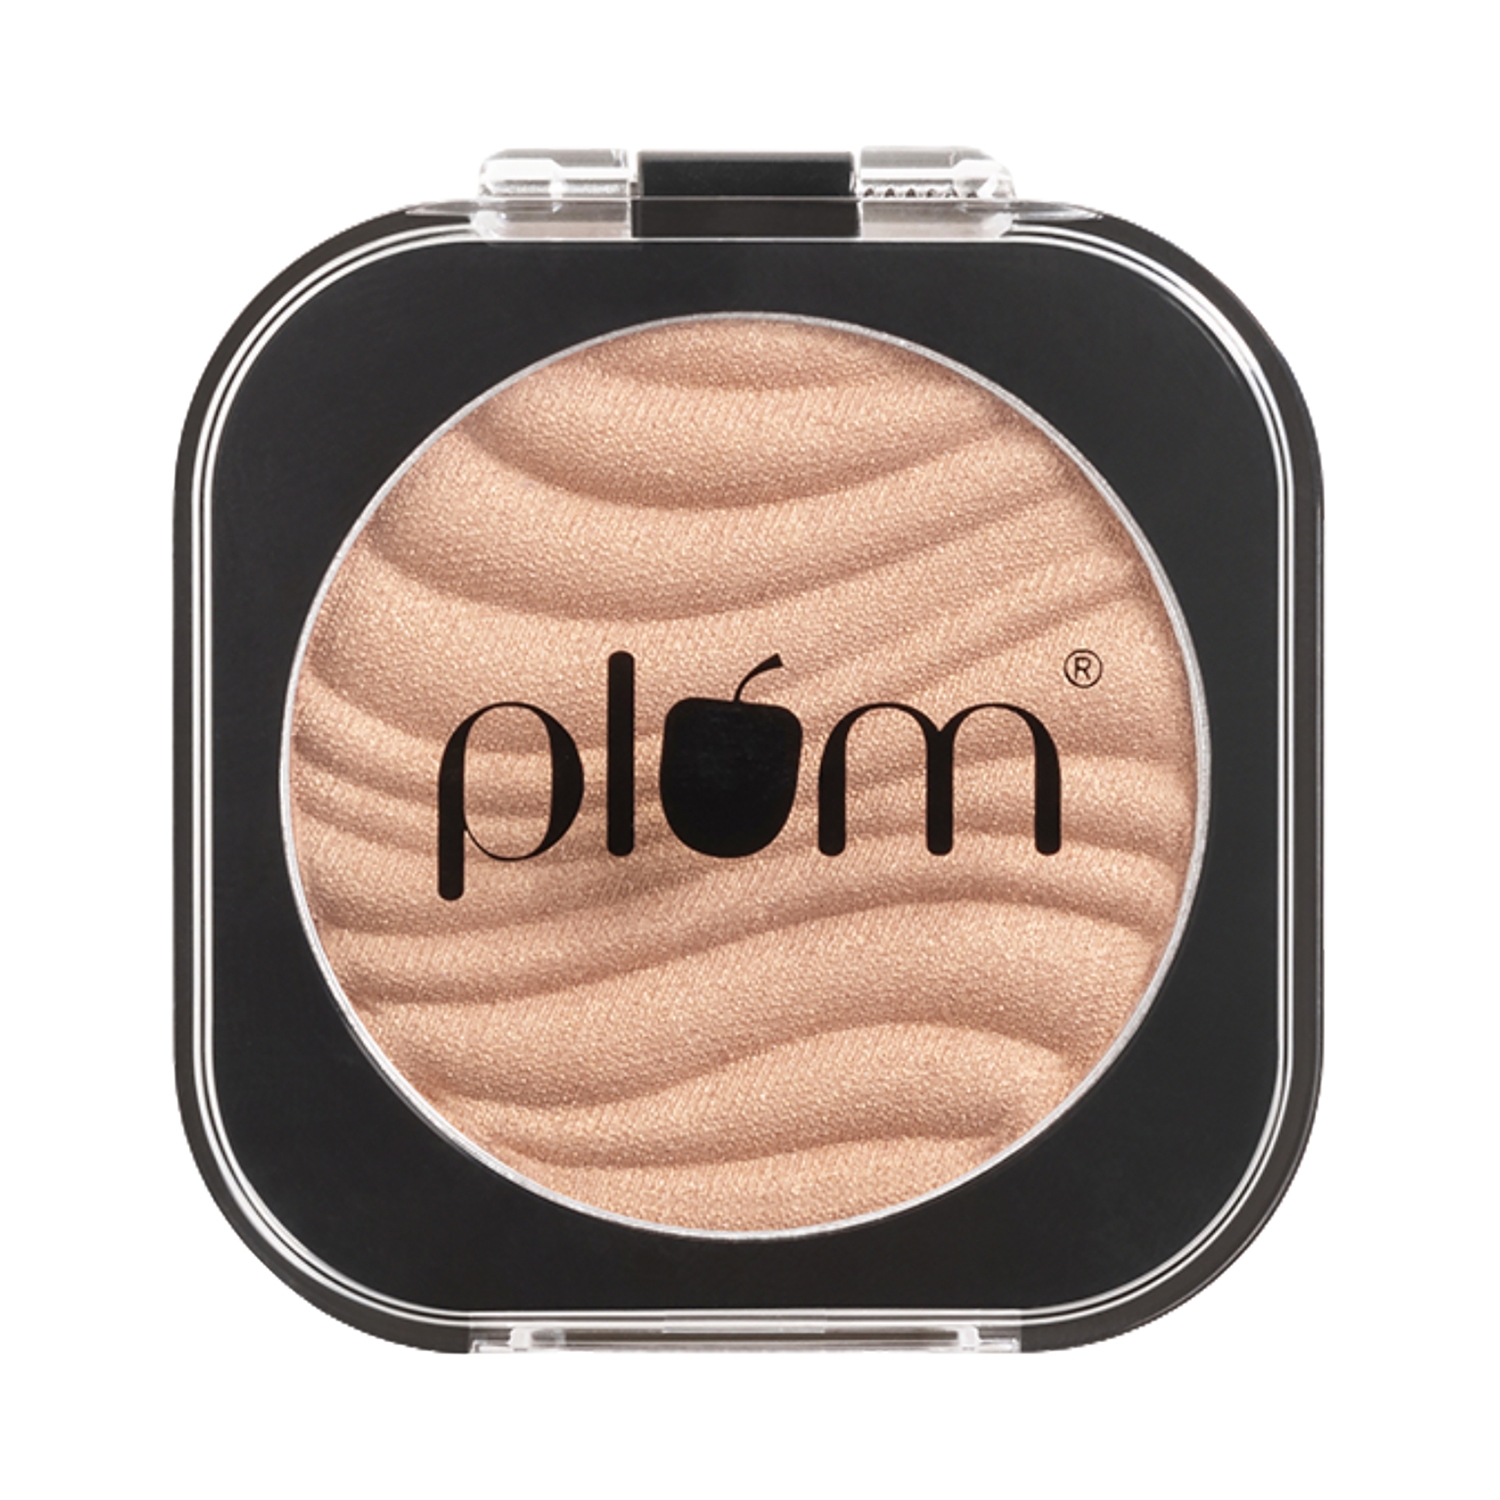 Plum | Plum There You Glow Highlighter - 122 Gold Touch (4.5g)